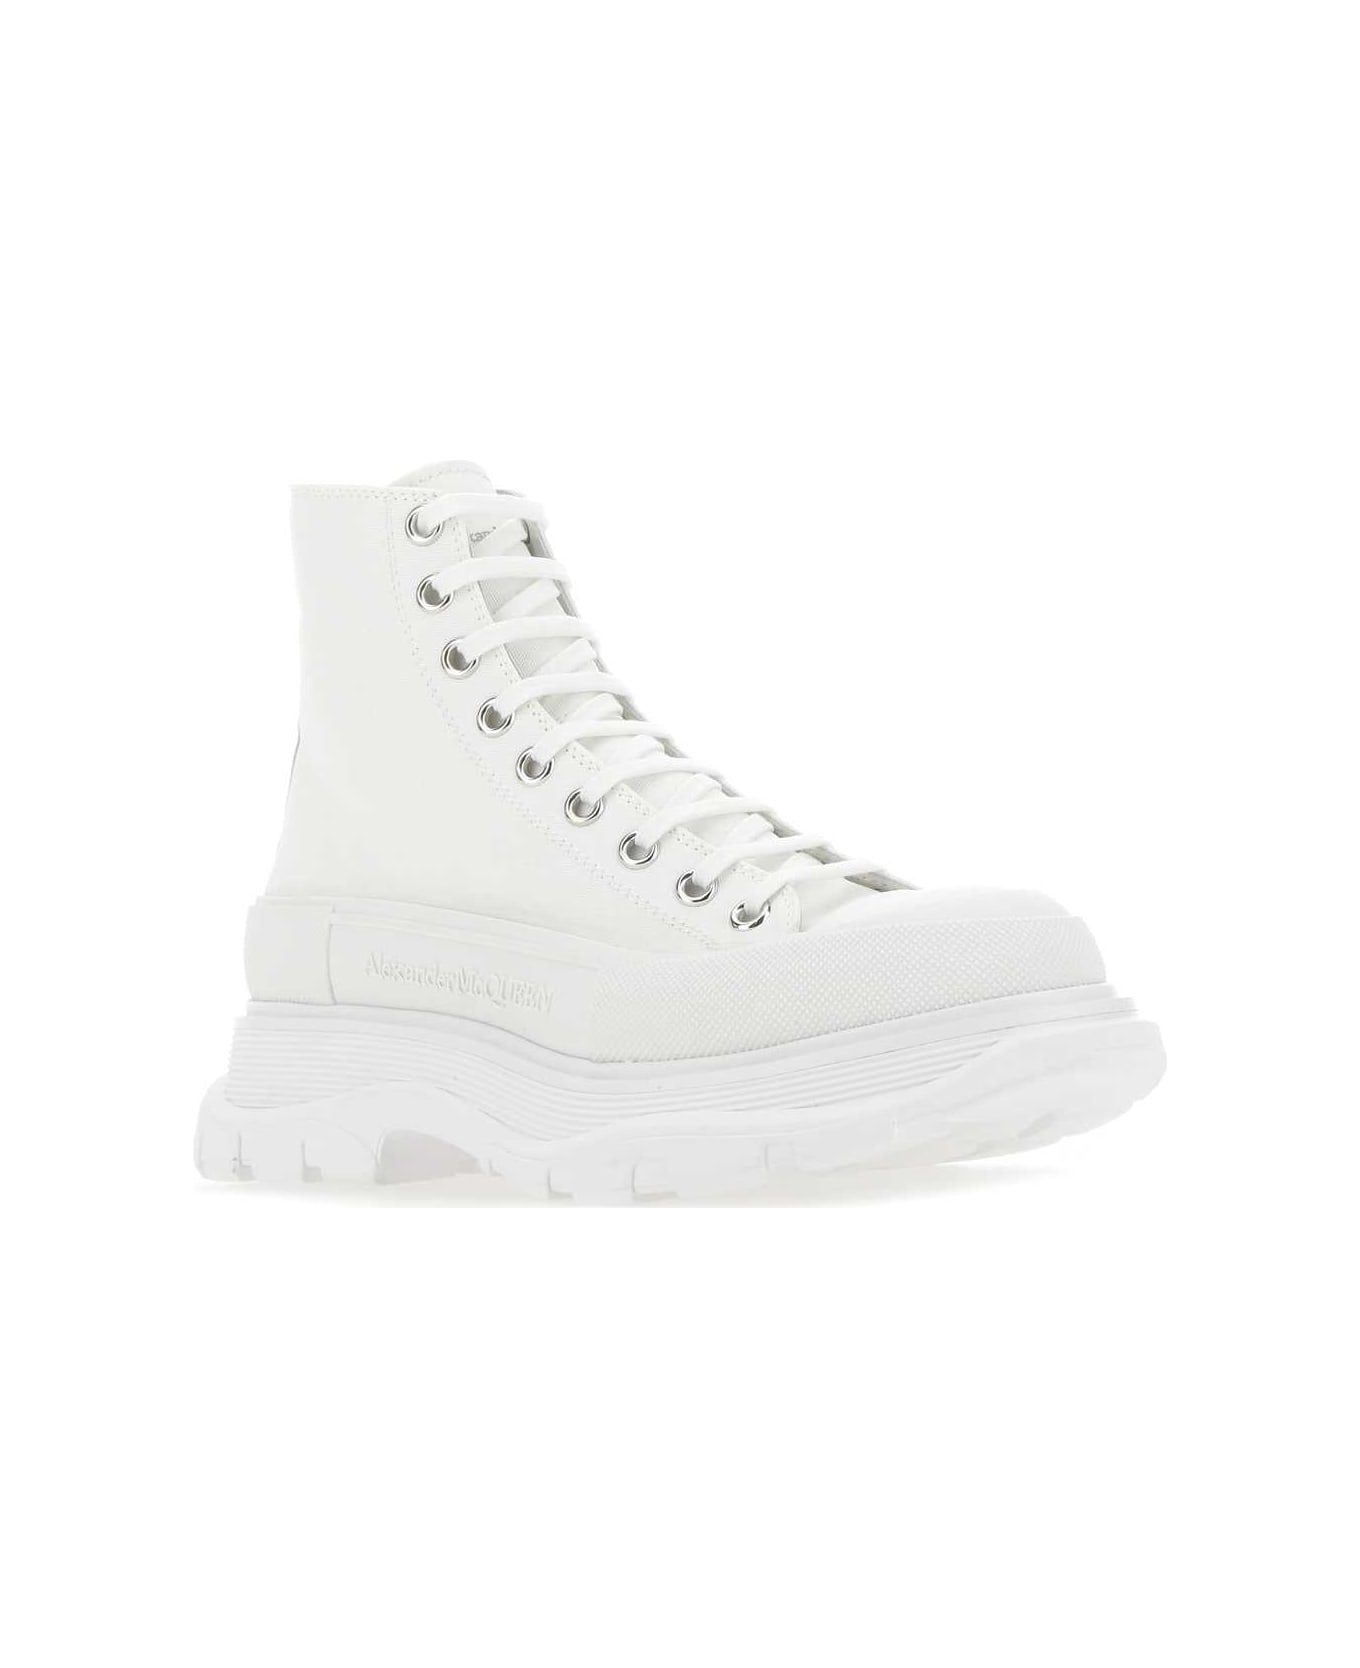 Alexander McQueen White Canvas And Rubber Tread Slick Sneakers - 9000 スニーカー